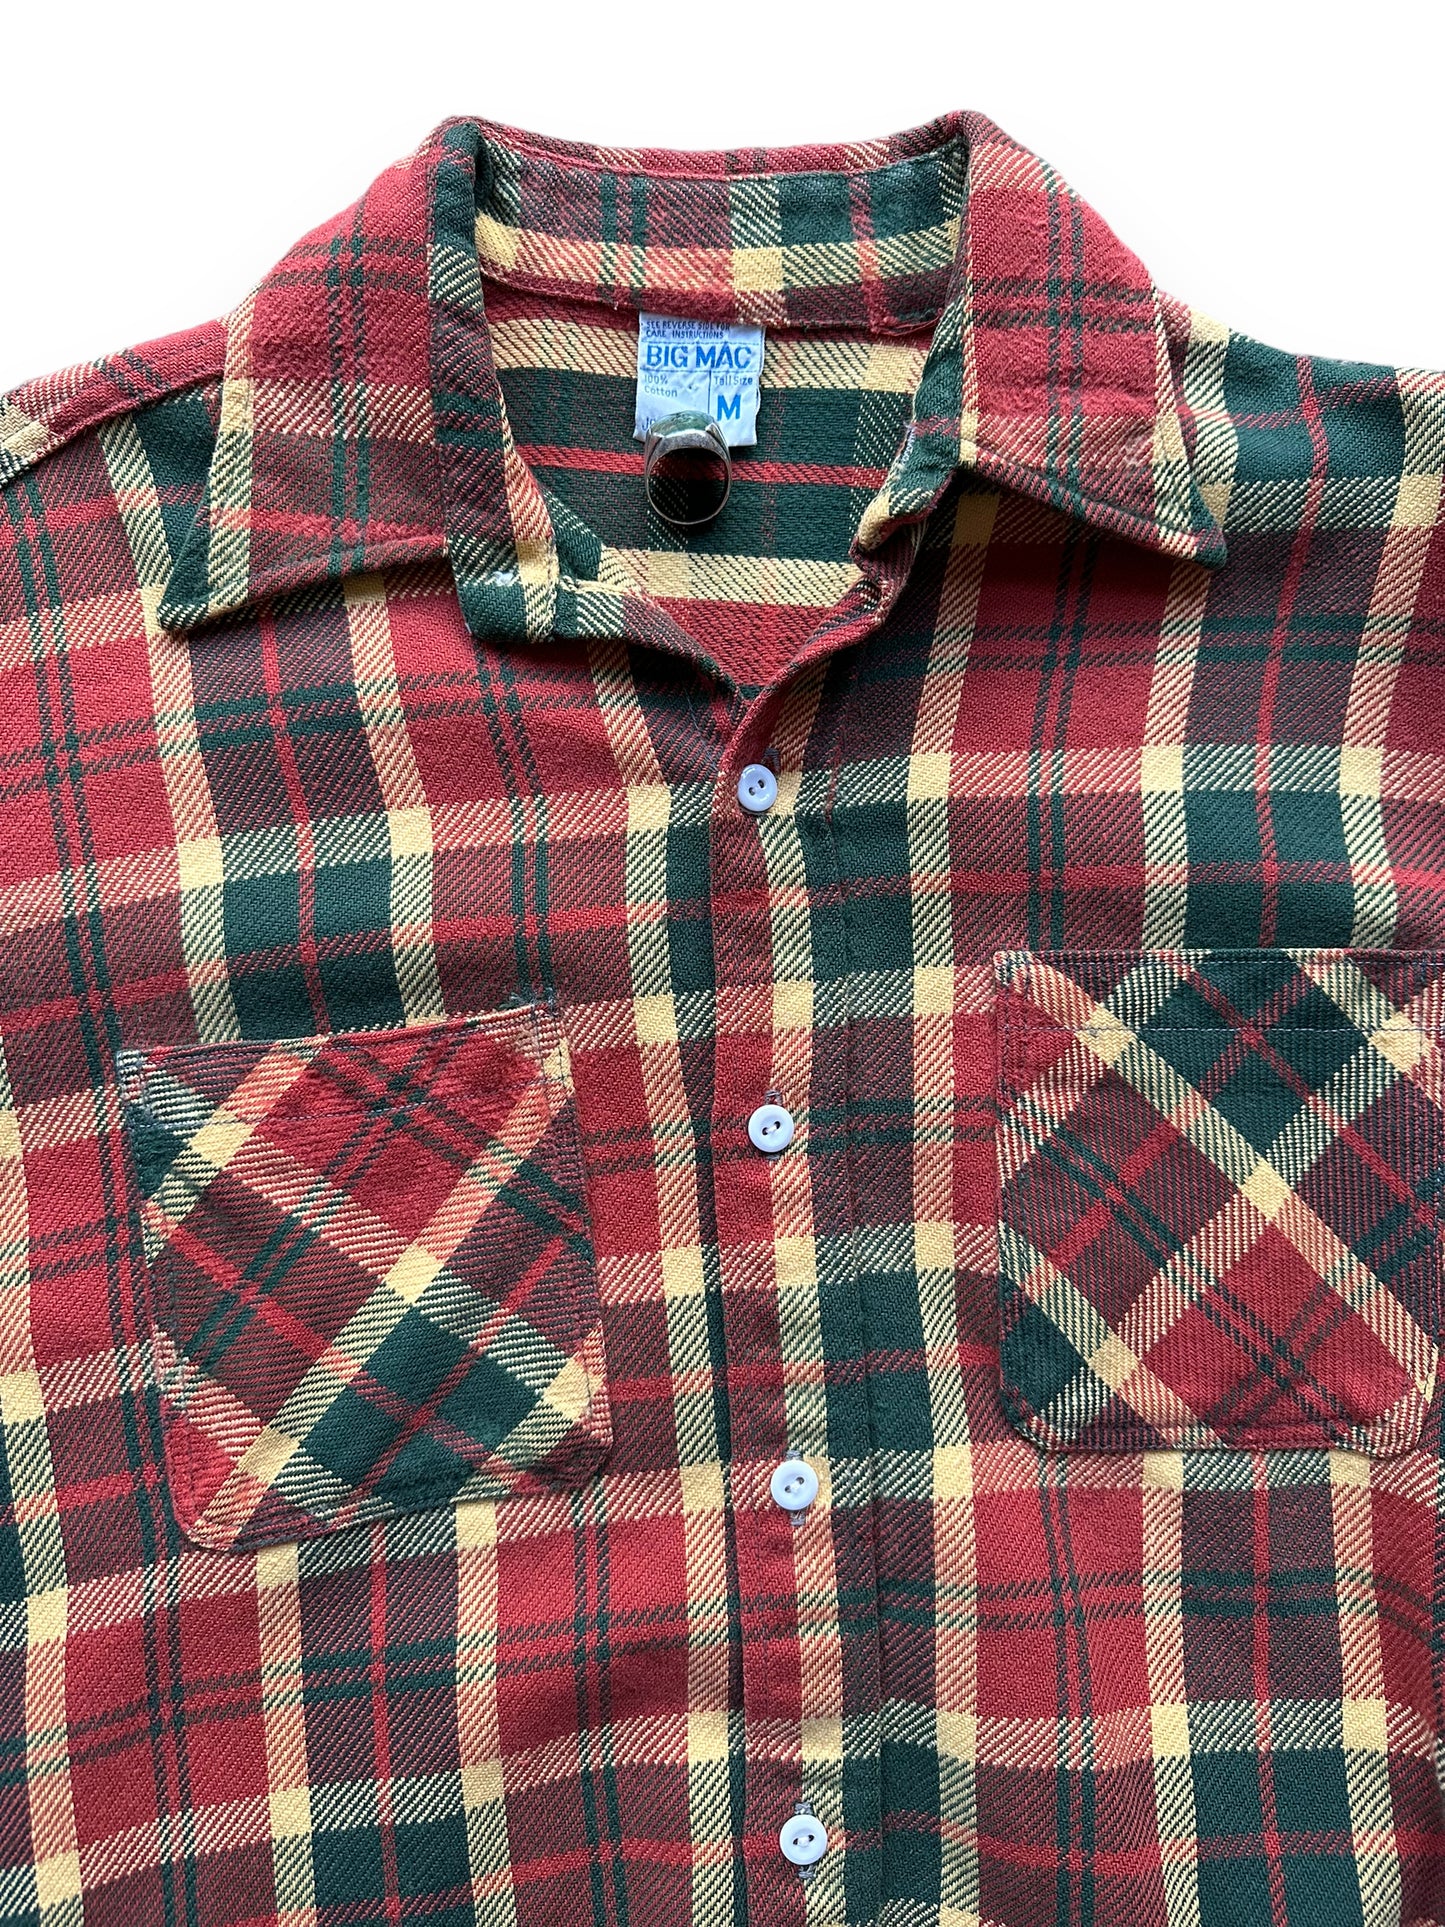 Upper Chest Area on Vintage Red & Green Big Mac Cotton Flannel SZ M Tall | Vintage Cotton Flannel Seattle | Barn Owl Vintage Seattle